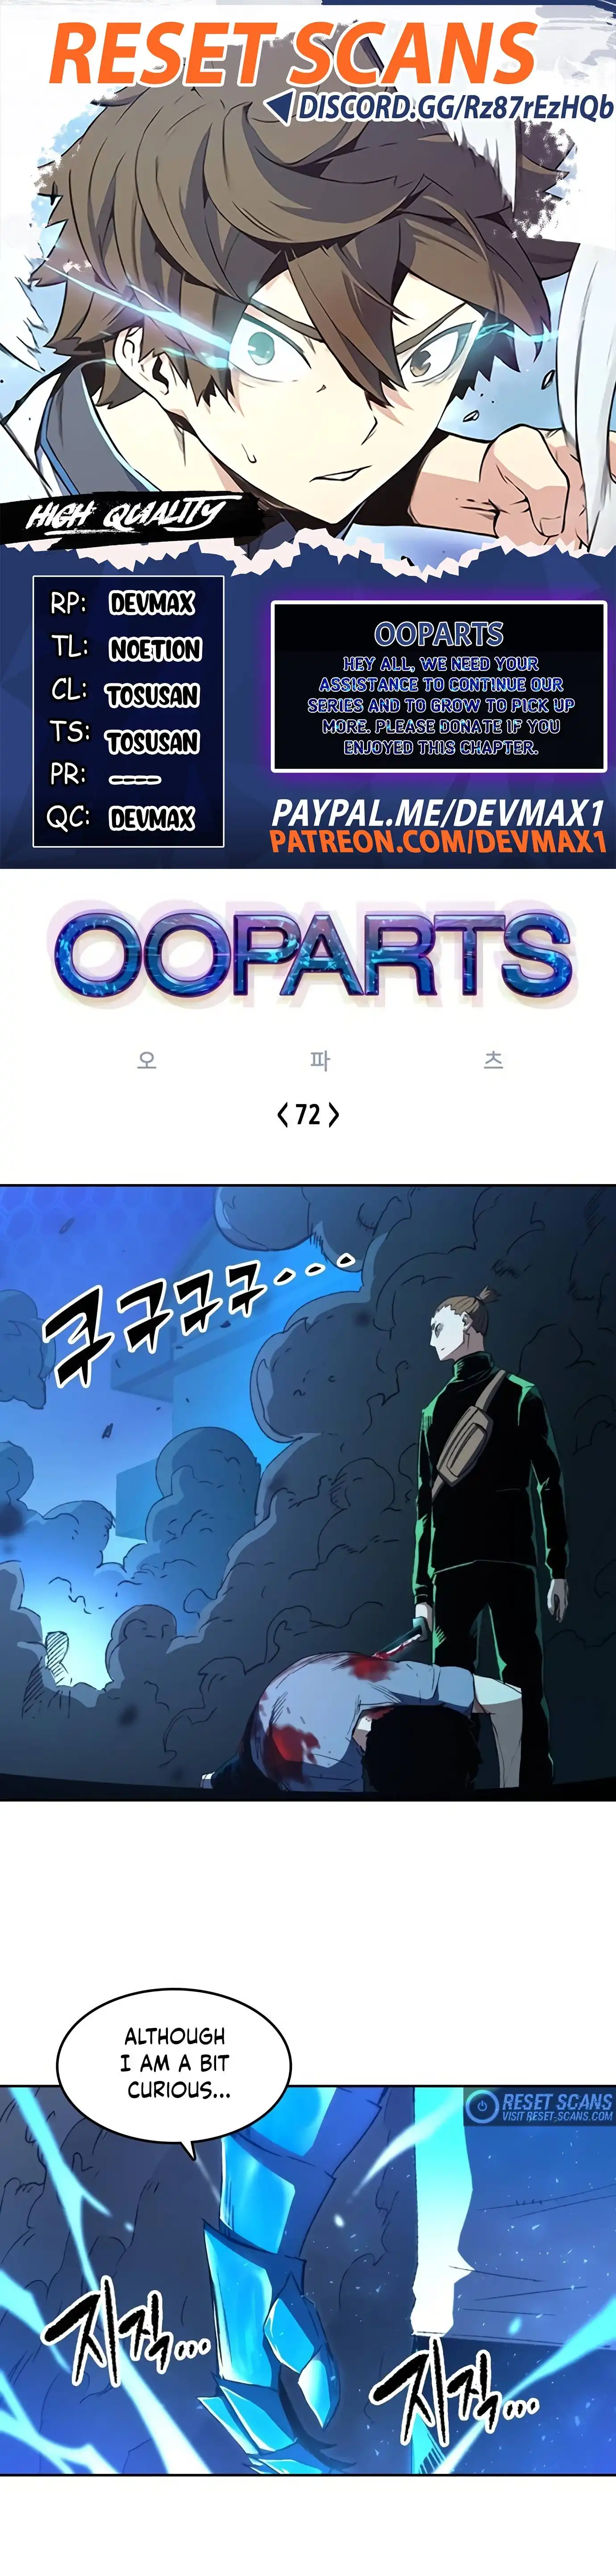 OOPARTS Chapter 72